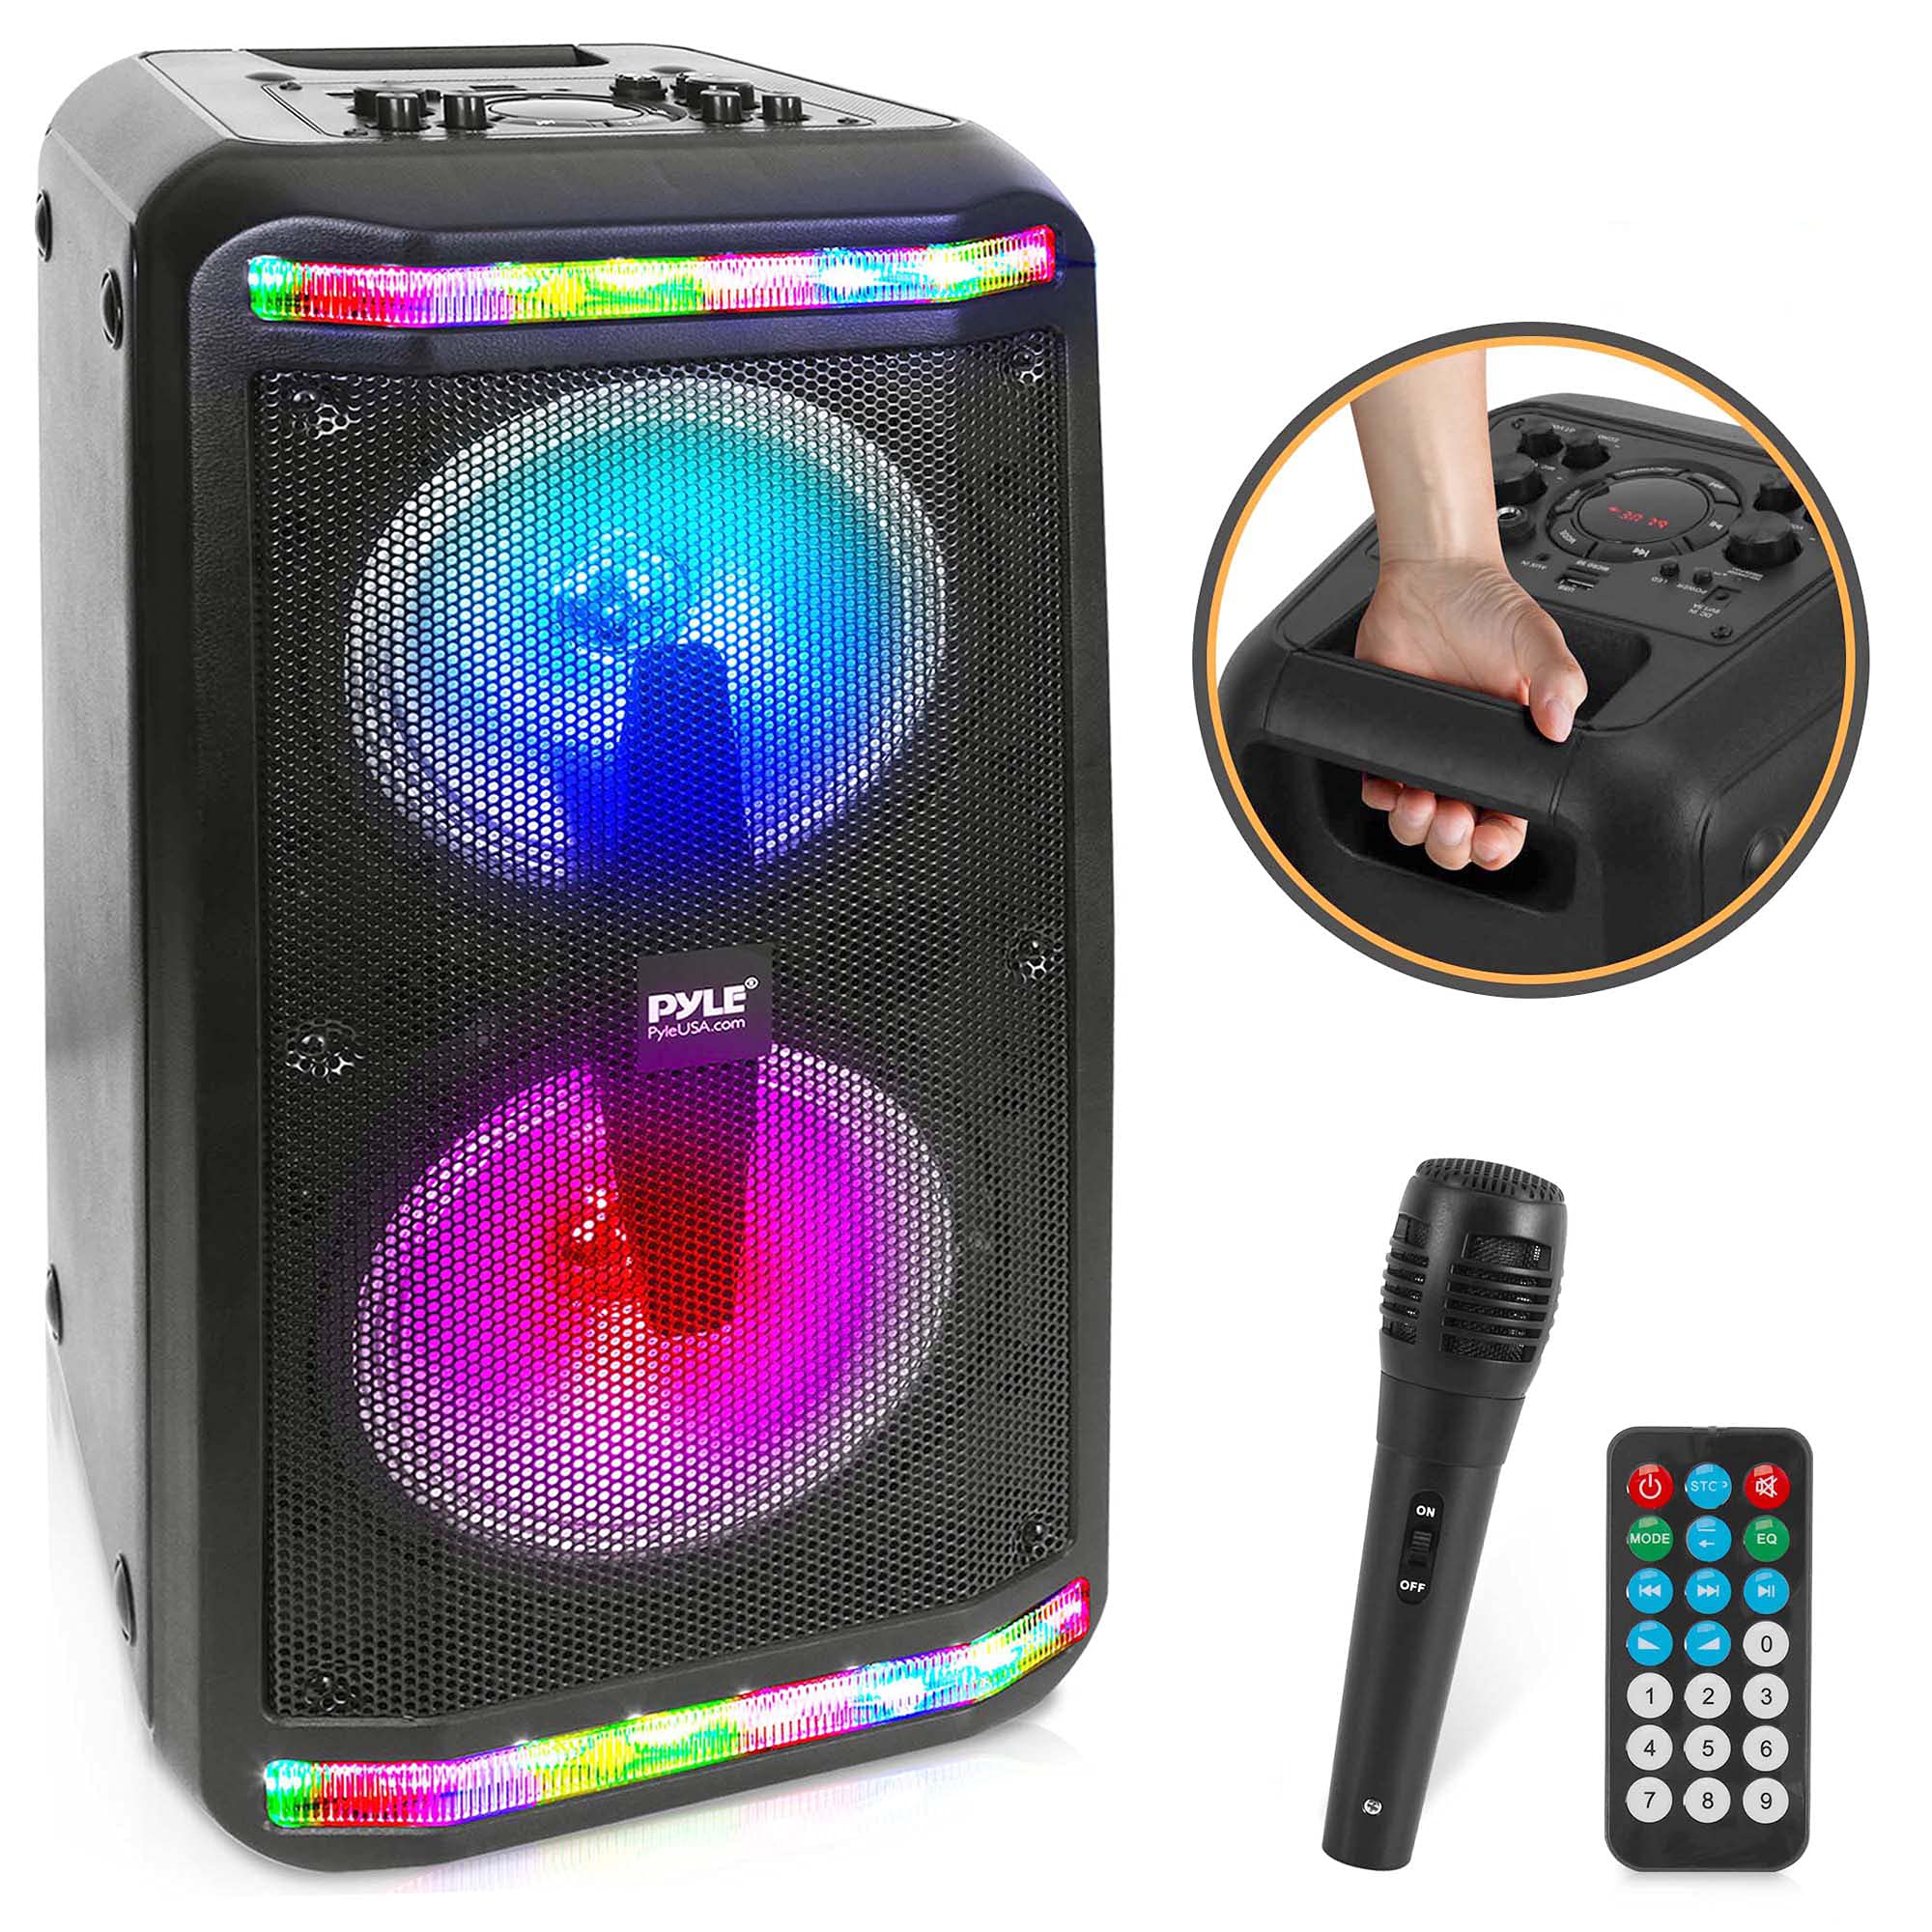 Pyle Sound Around Bluetooth Speaker & Microphone System - Portable Stereo Karaoke Speaker with Wired Mic, MP3/USB/Micro SD Readers, FM Radio (6.5’’ Subwoofers, 500 Watt MAX), Black, One Size, PPHP266B